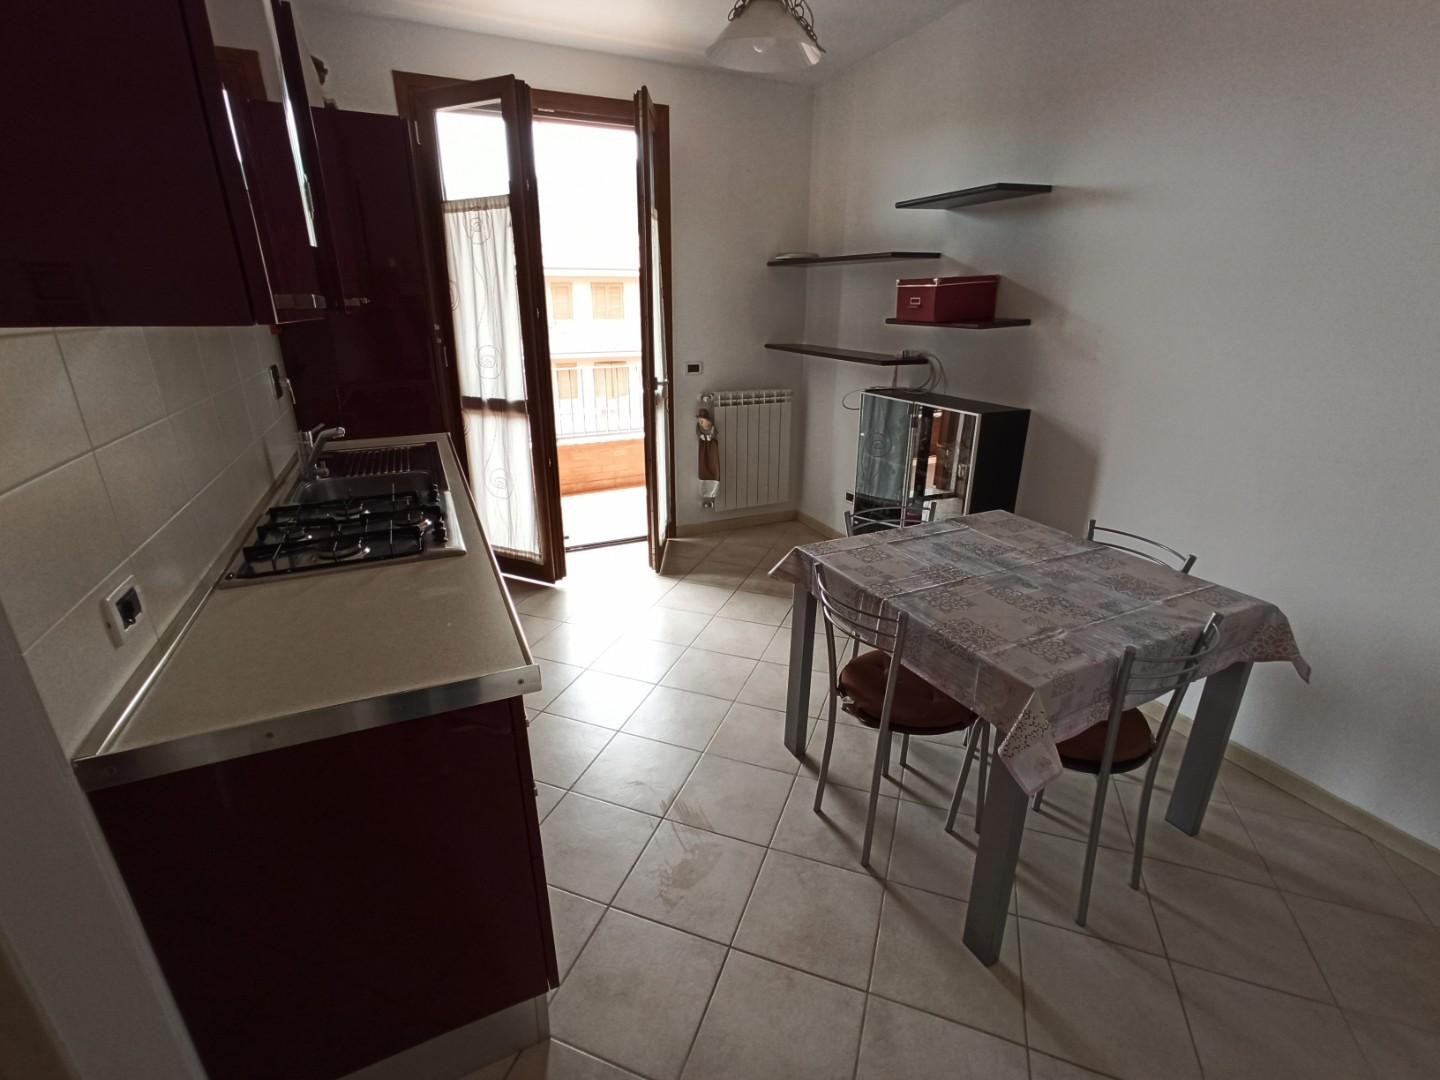 Apartment for sale, ref. 891